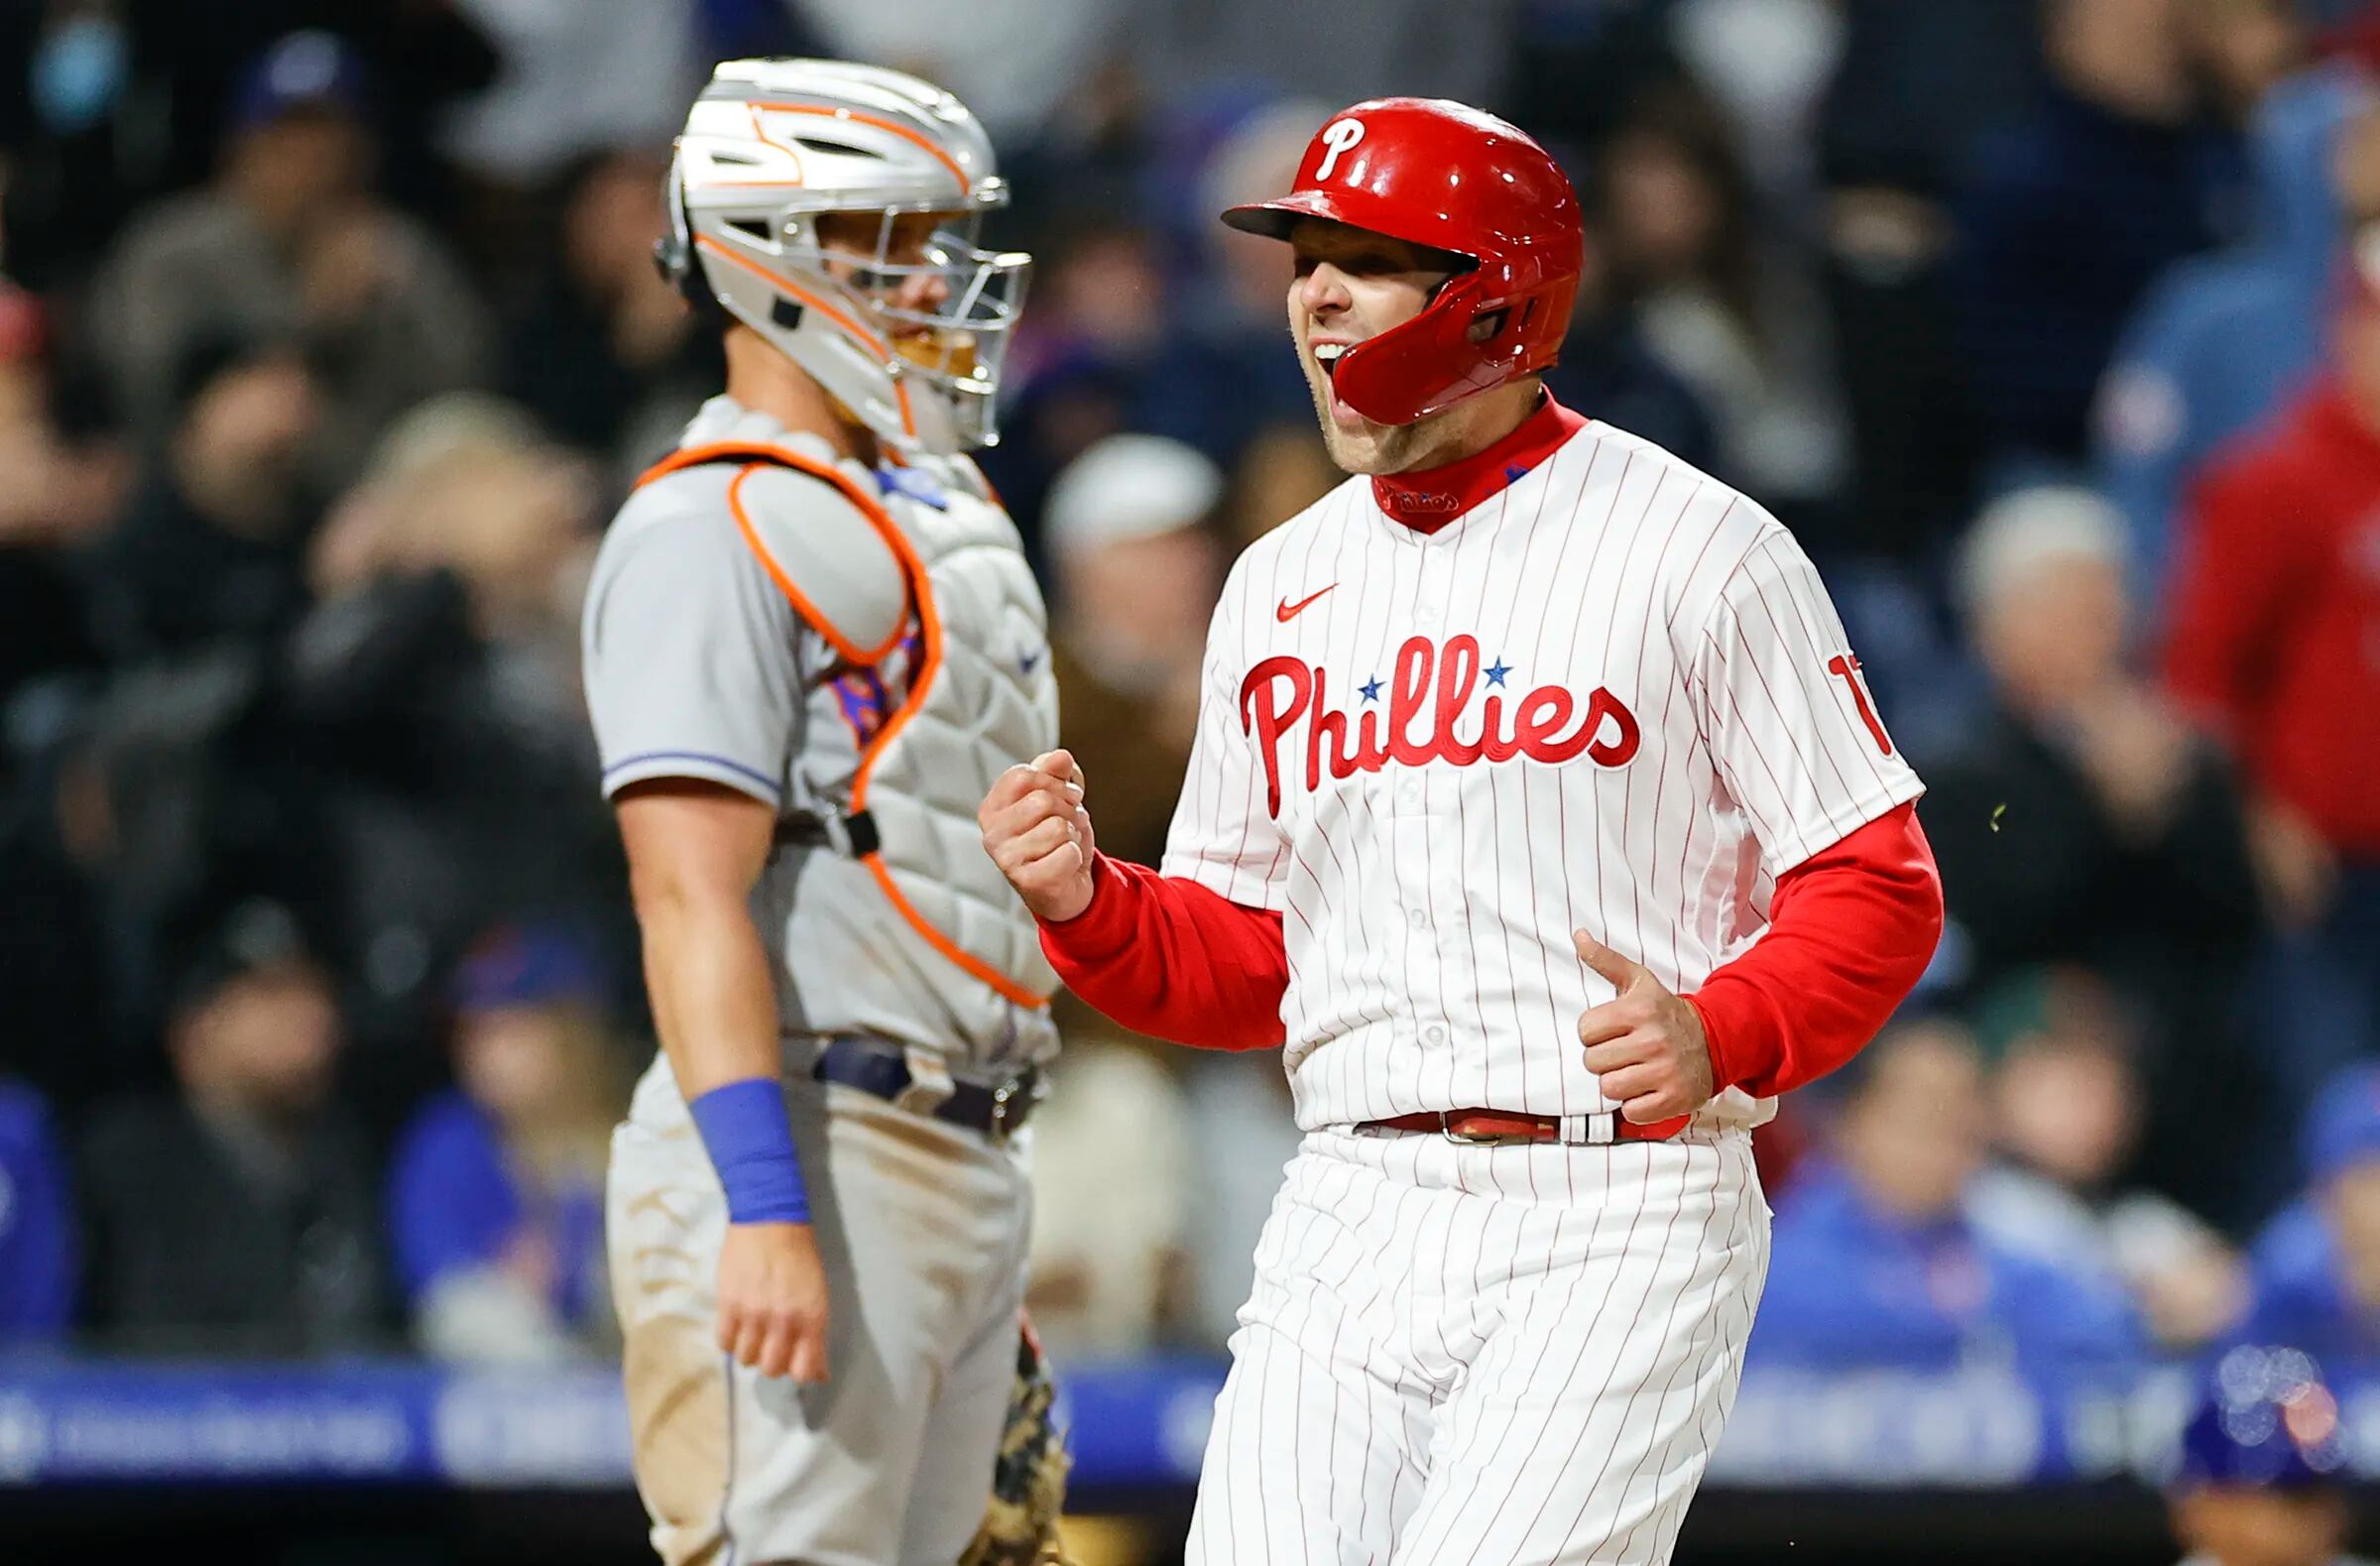 Photos from the Phillies 5-4 comeback win over the Mets